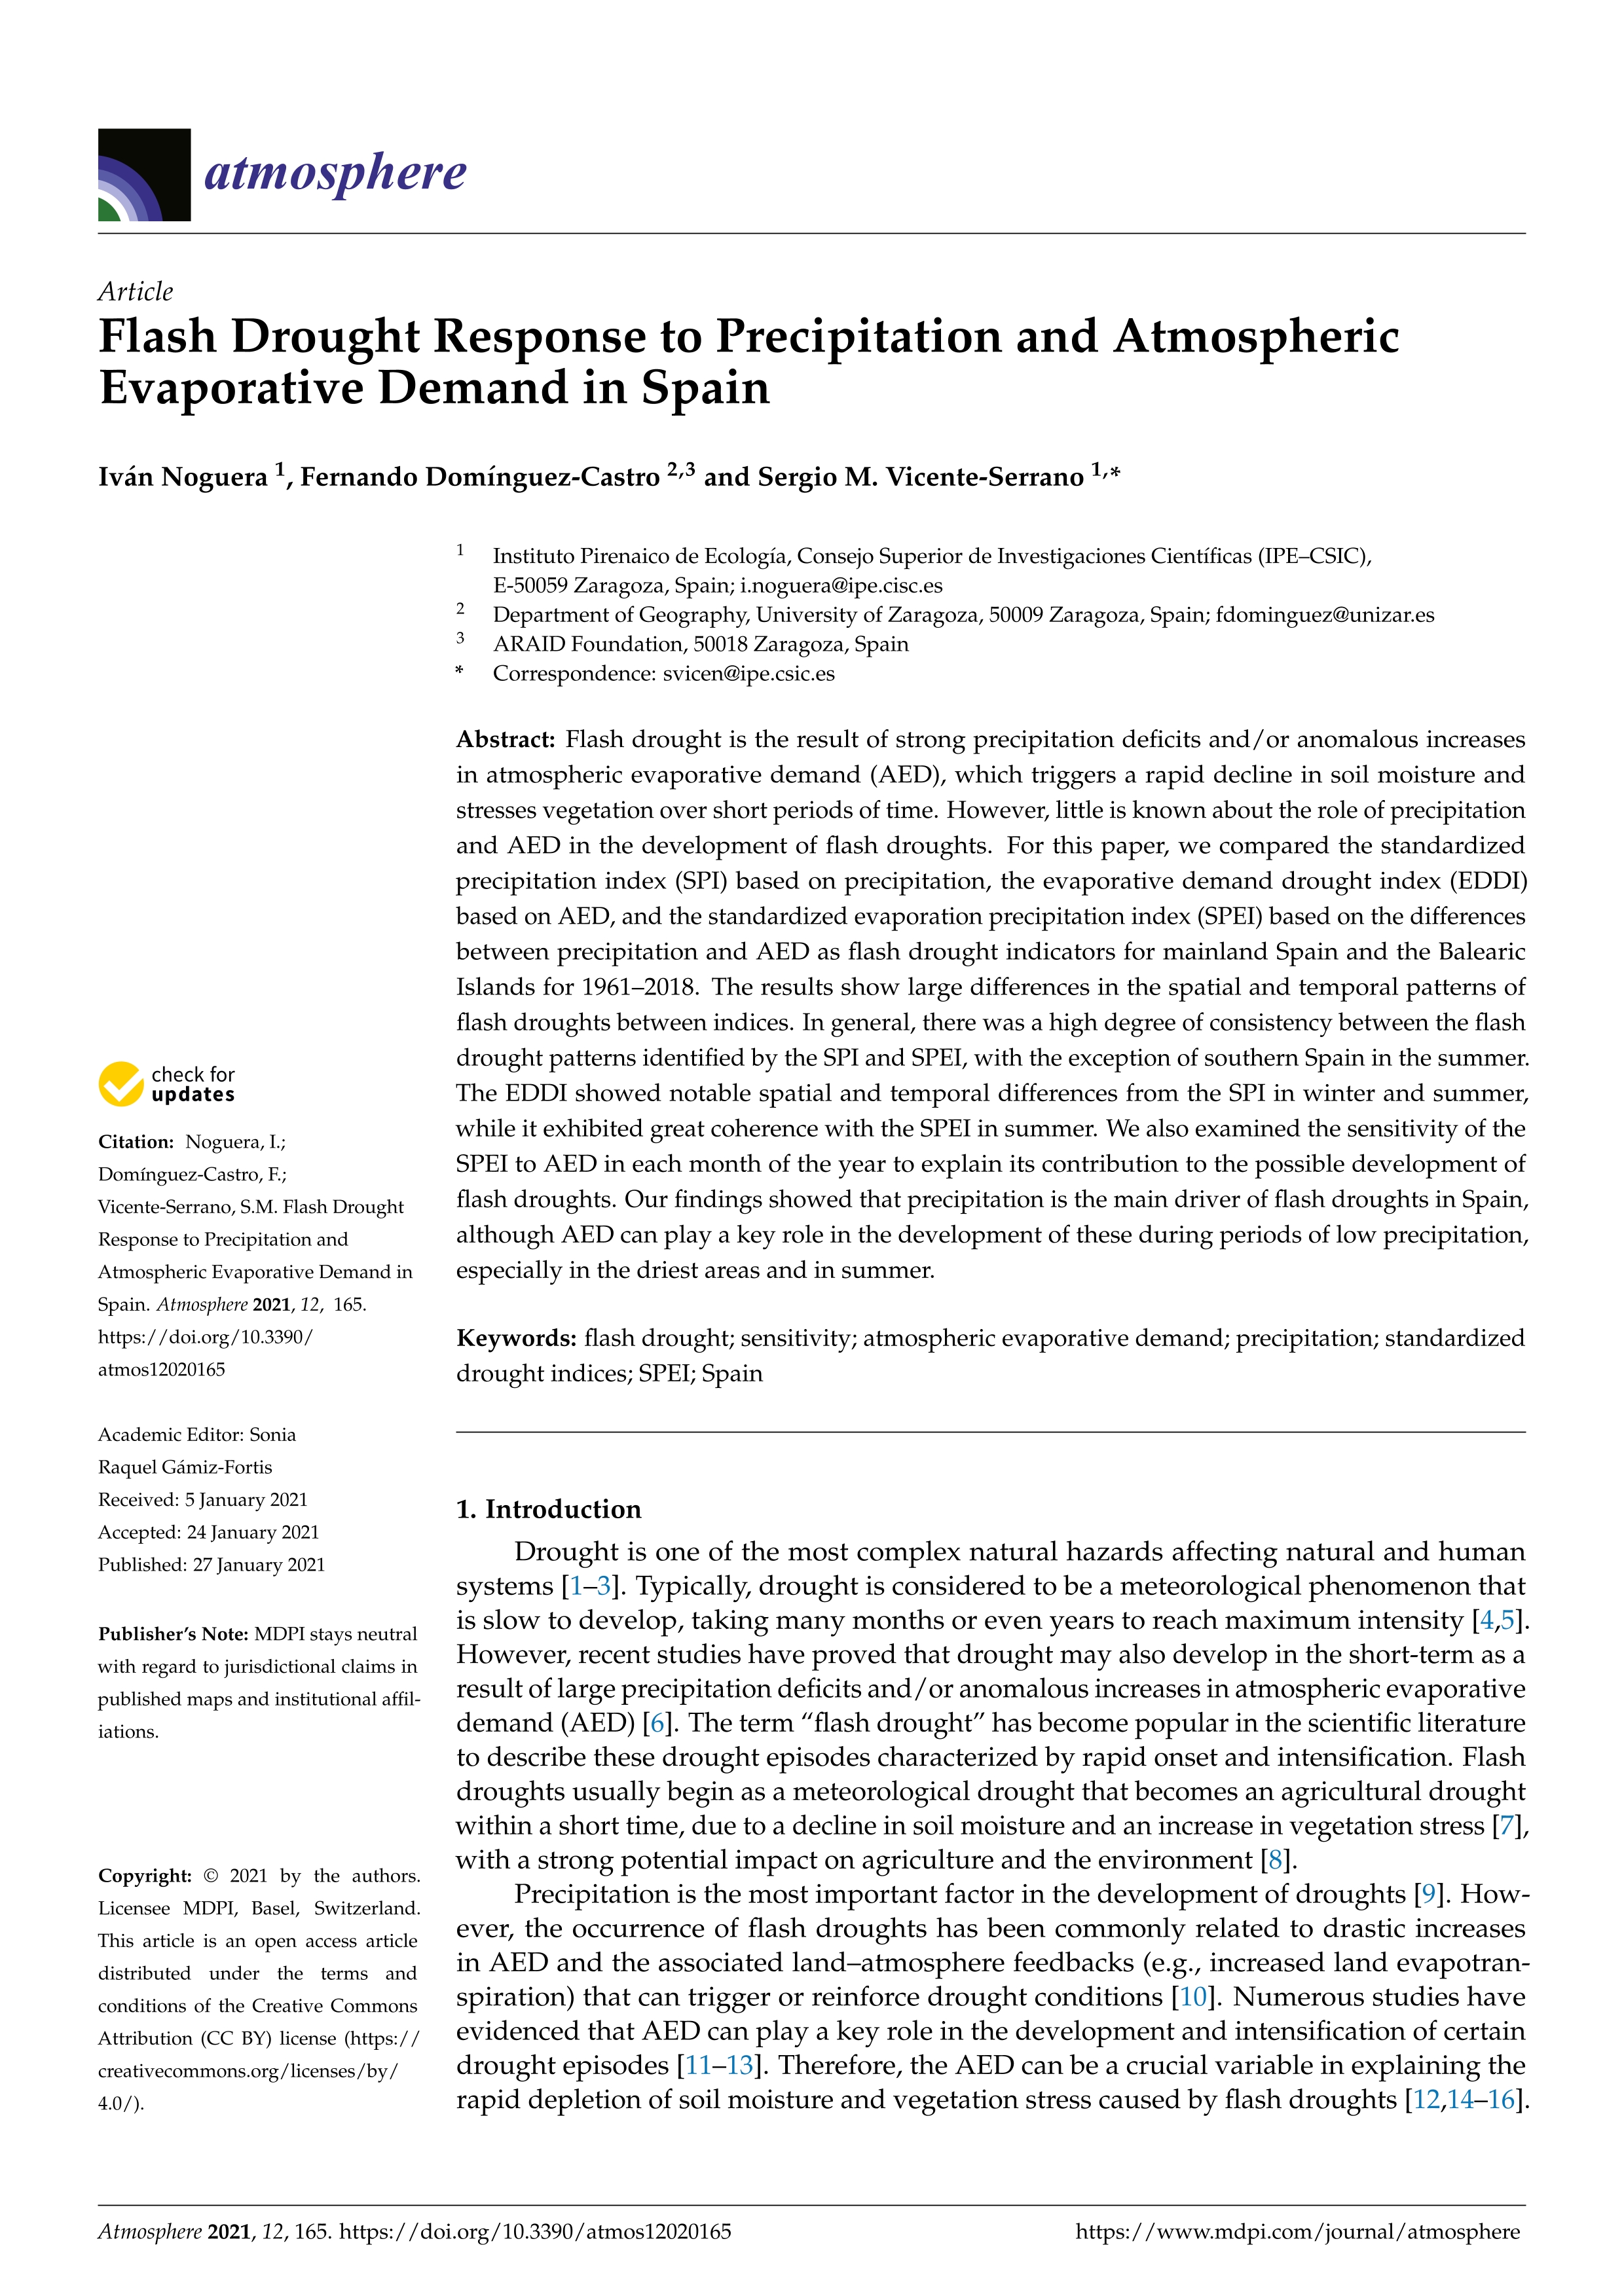 Flash drought response to precipitation and atmospheric evaporative demand in Sspain